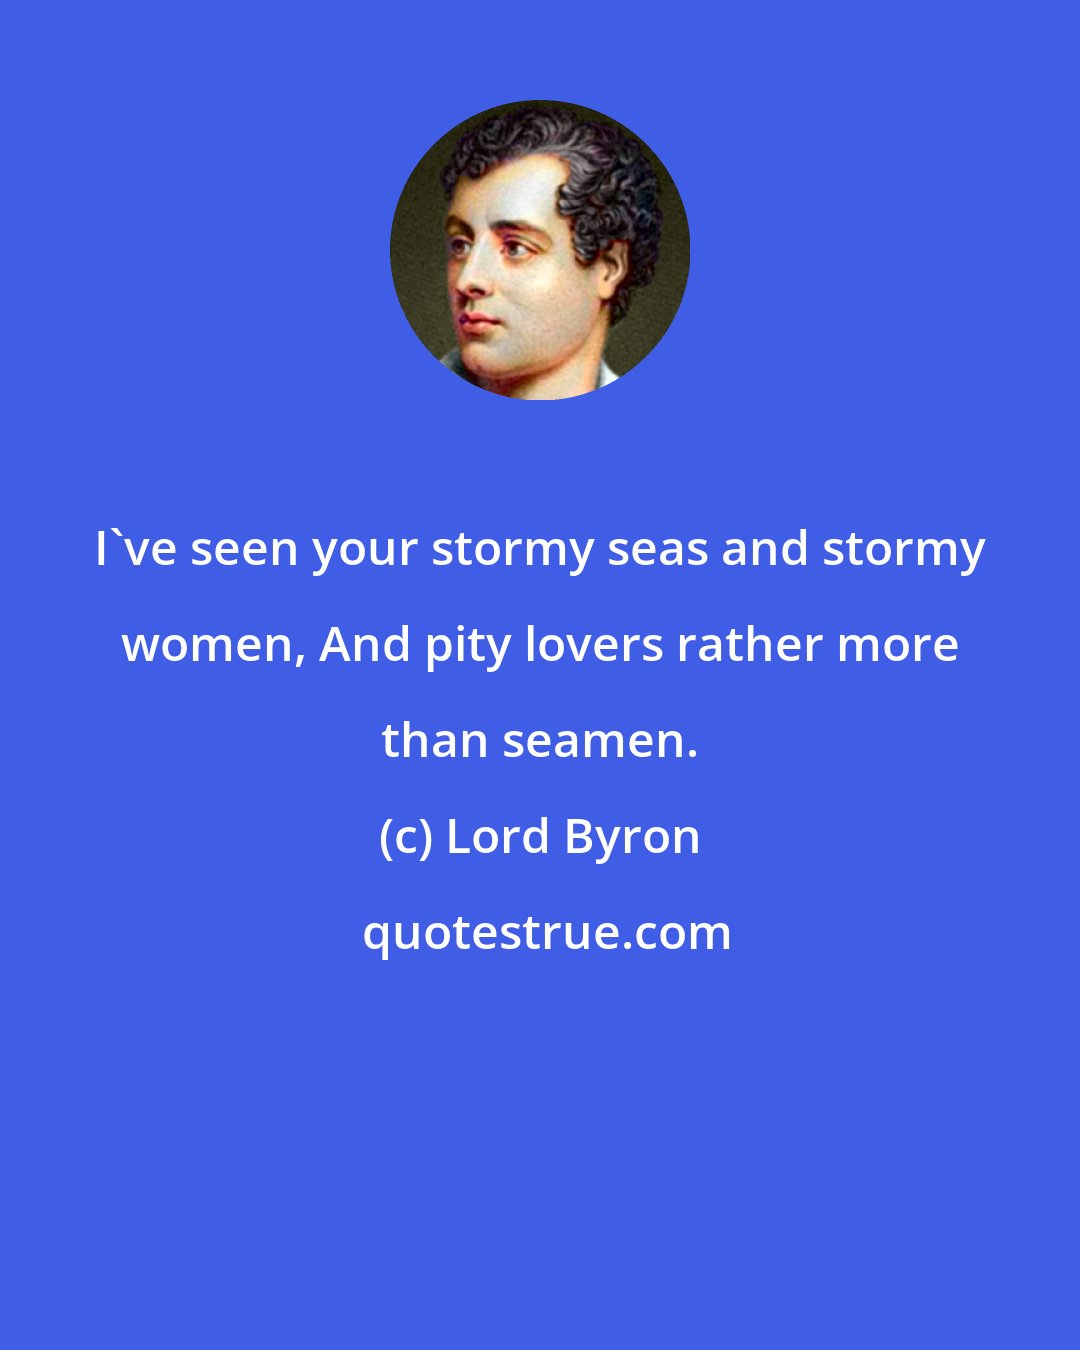 Lord Byron: I've seen your stormy seas and stormy women, And pity lovers rather more than seamen.